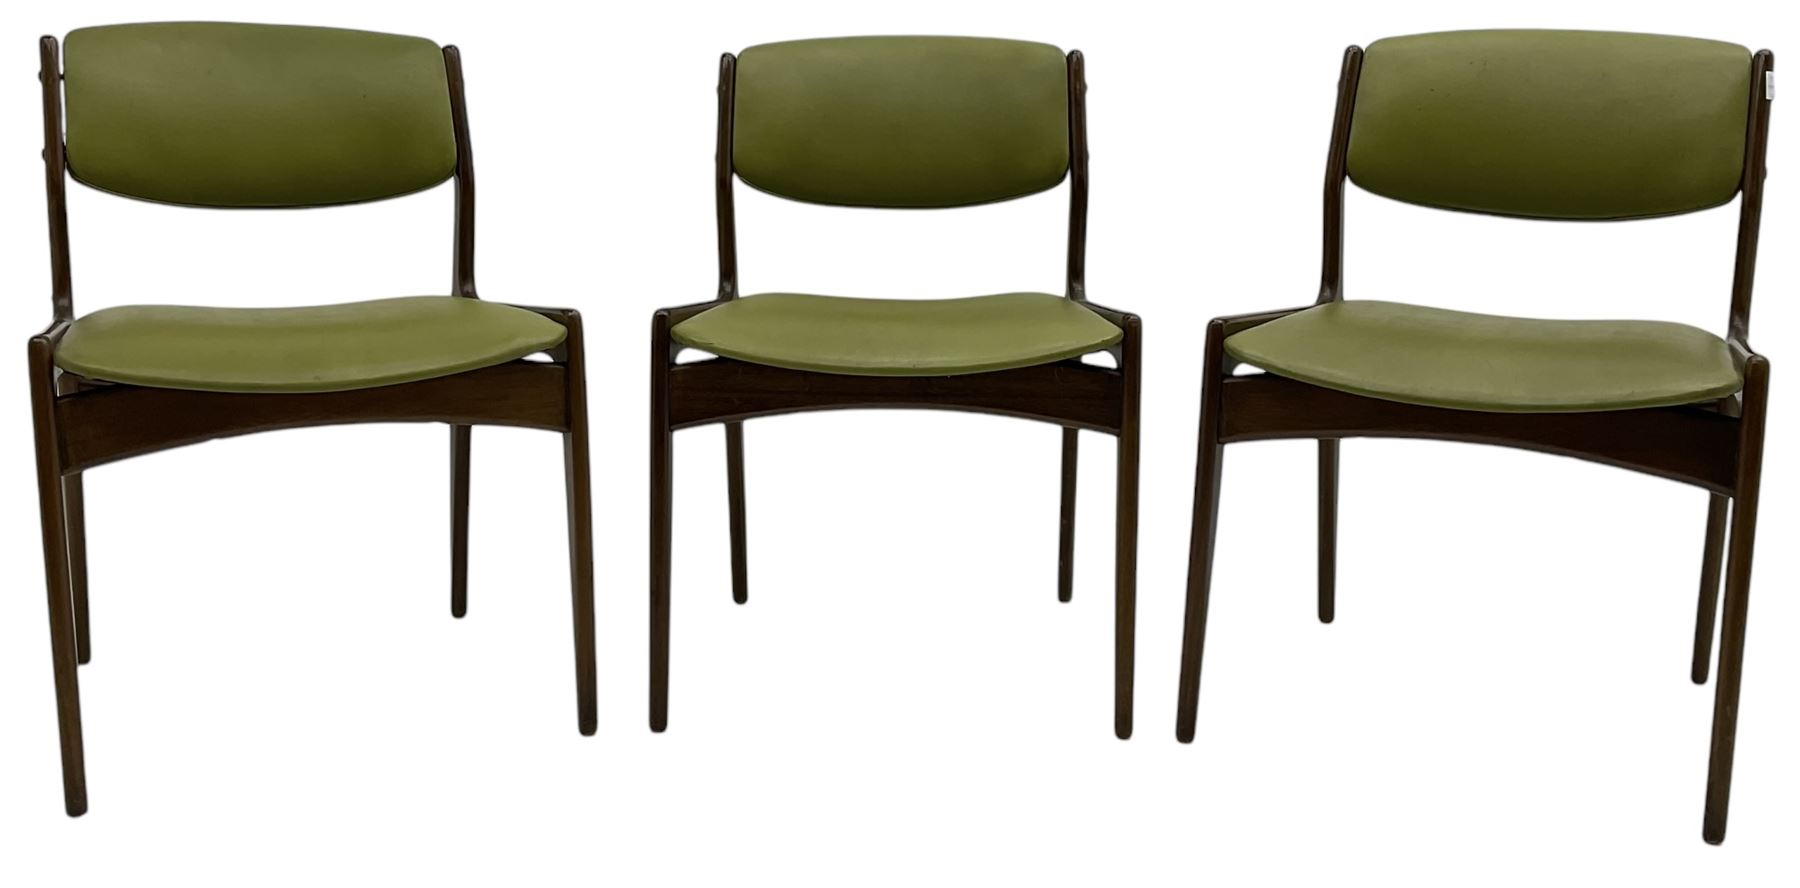 Set of six (4+2) mid-20th century teak dining chairs upholstered in green vinyl - Image 5 of 6